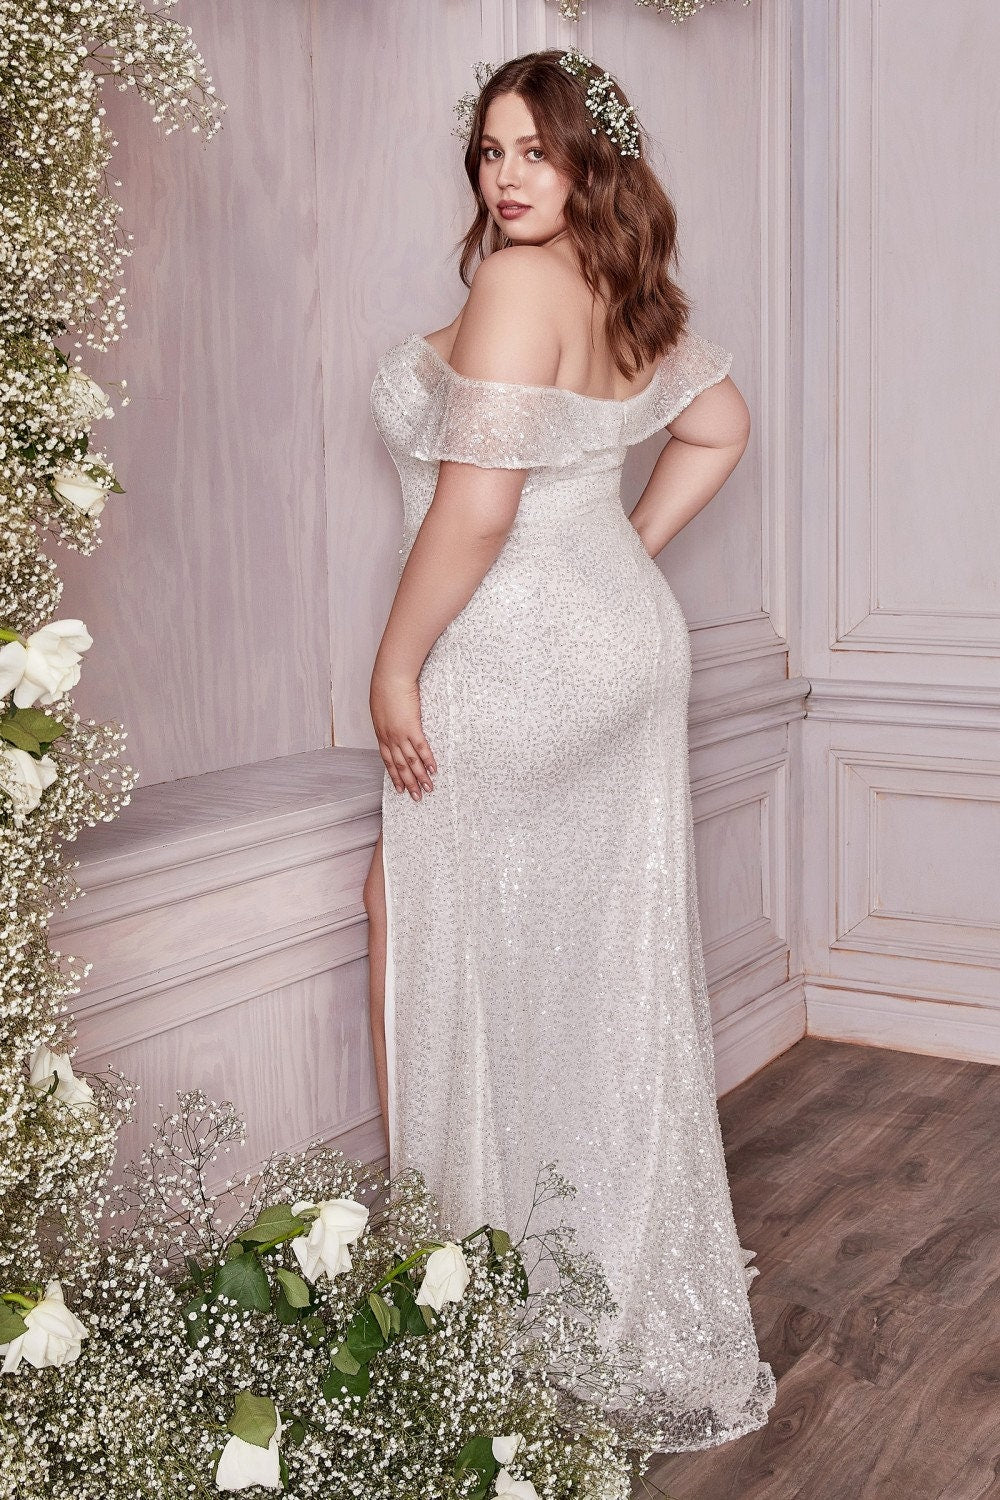 Glistening Sequin Embellished Wedding Dress Bridal Gown Fit and Flare Figure Slimming Sweetheart Bodice with Split Off the Shoulder Sleeves